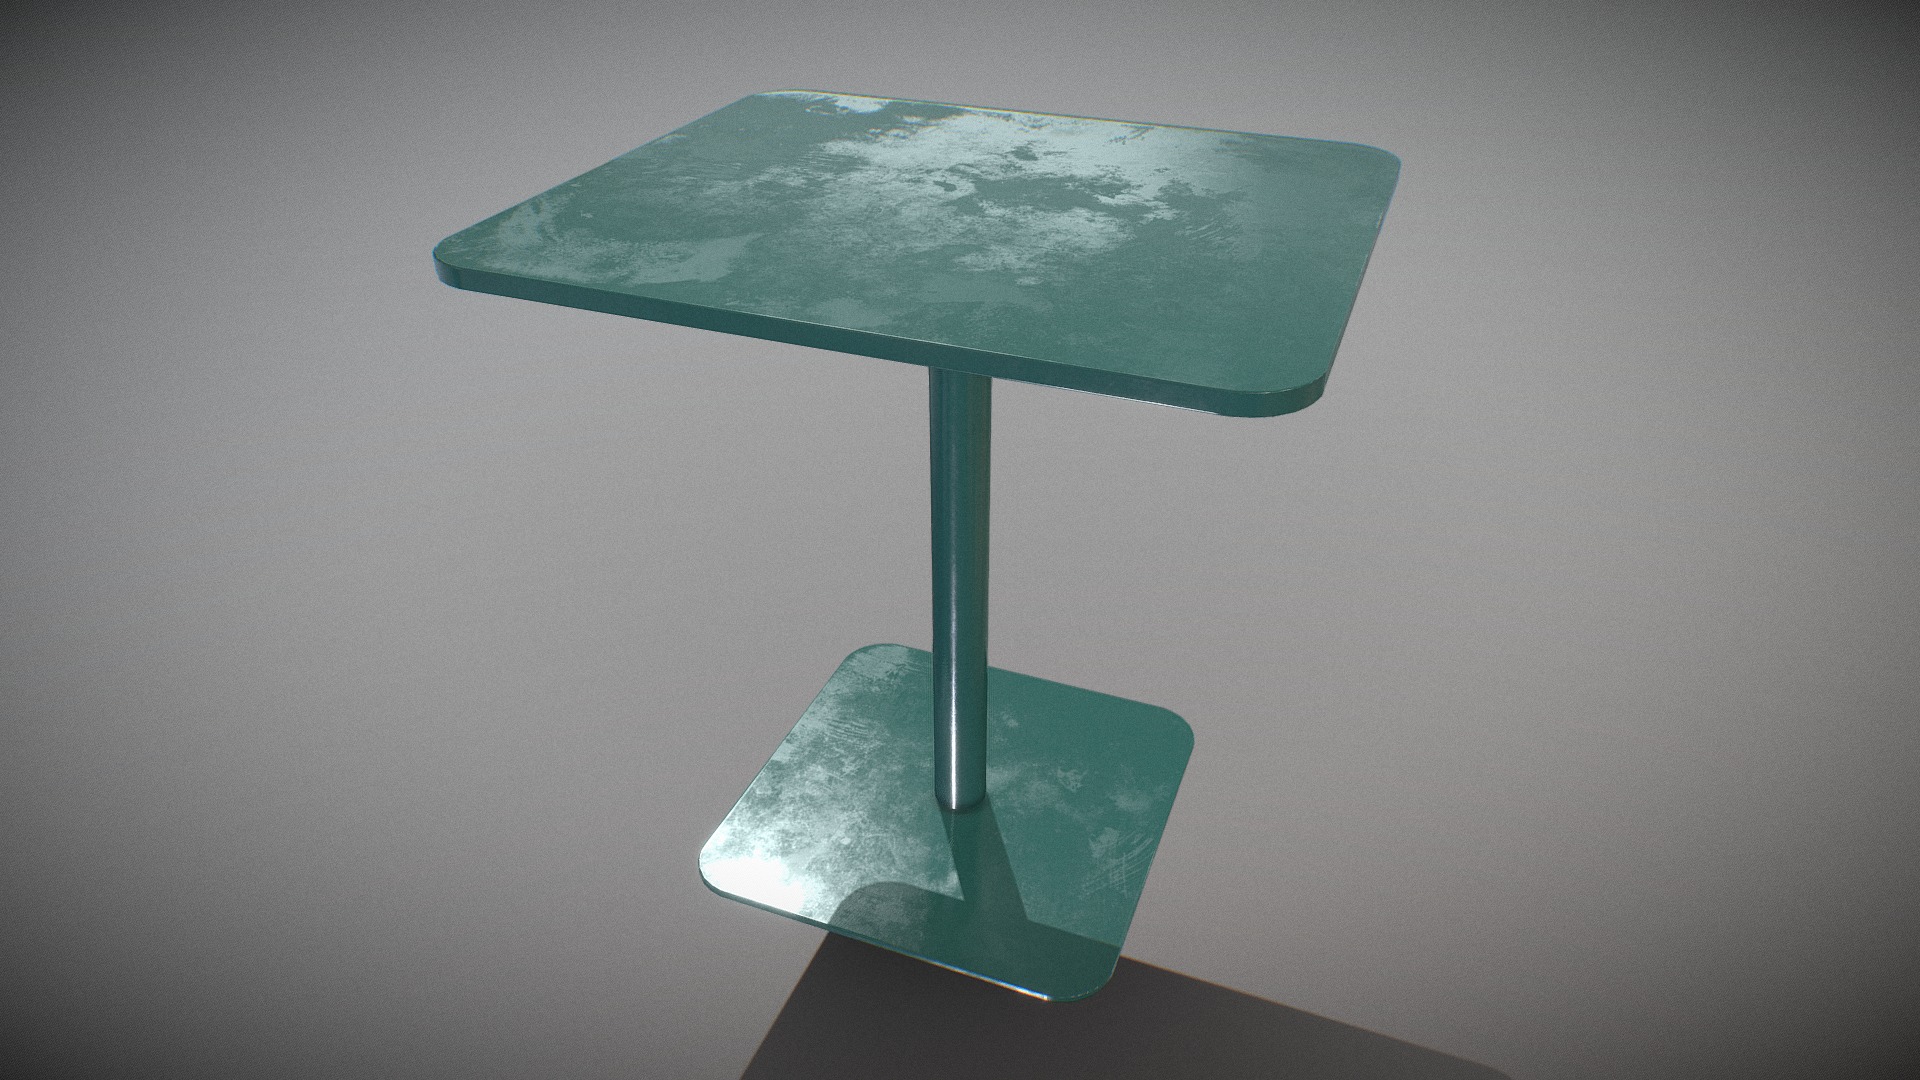 3D model Mesa Cafe Table-Model 4671 v-01 - This is a 3D model of the Mesa Cafe Table-Model 4671 v-01. The 3D model is about a green lamp shade.